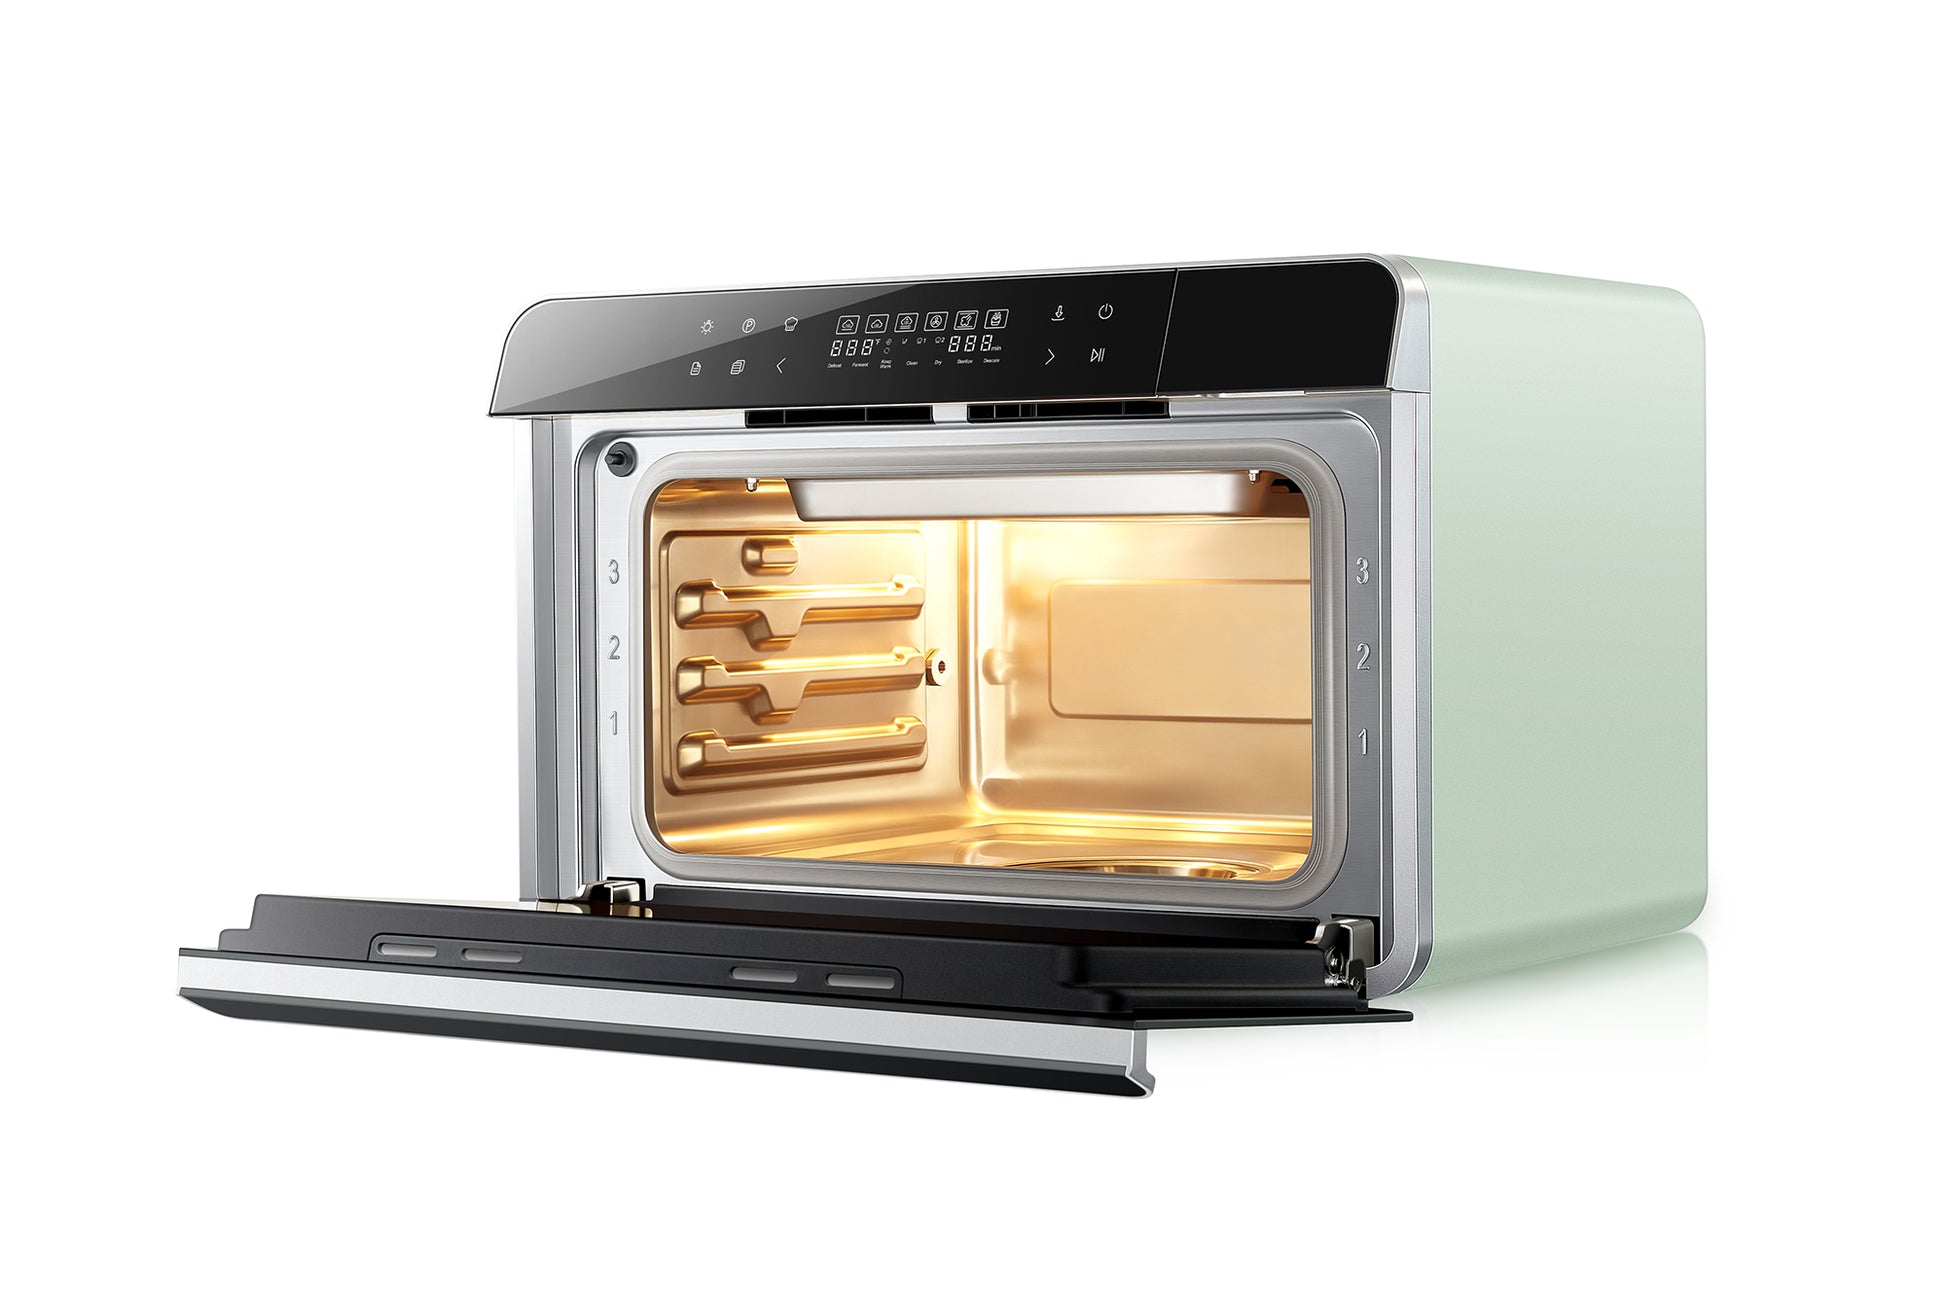 ROBAM  R-Box Green Convection Toaster Oven with Rotisserie (1800-Watt) CT763G